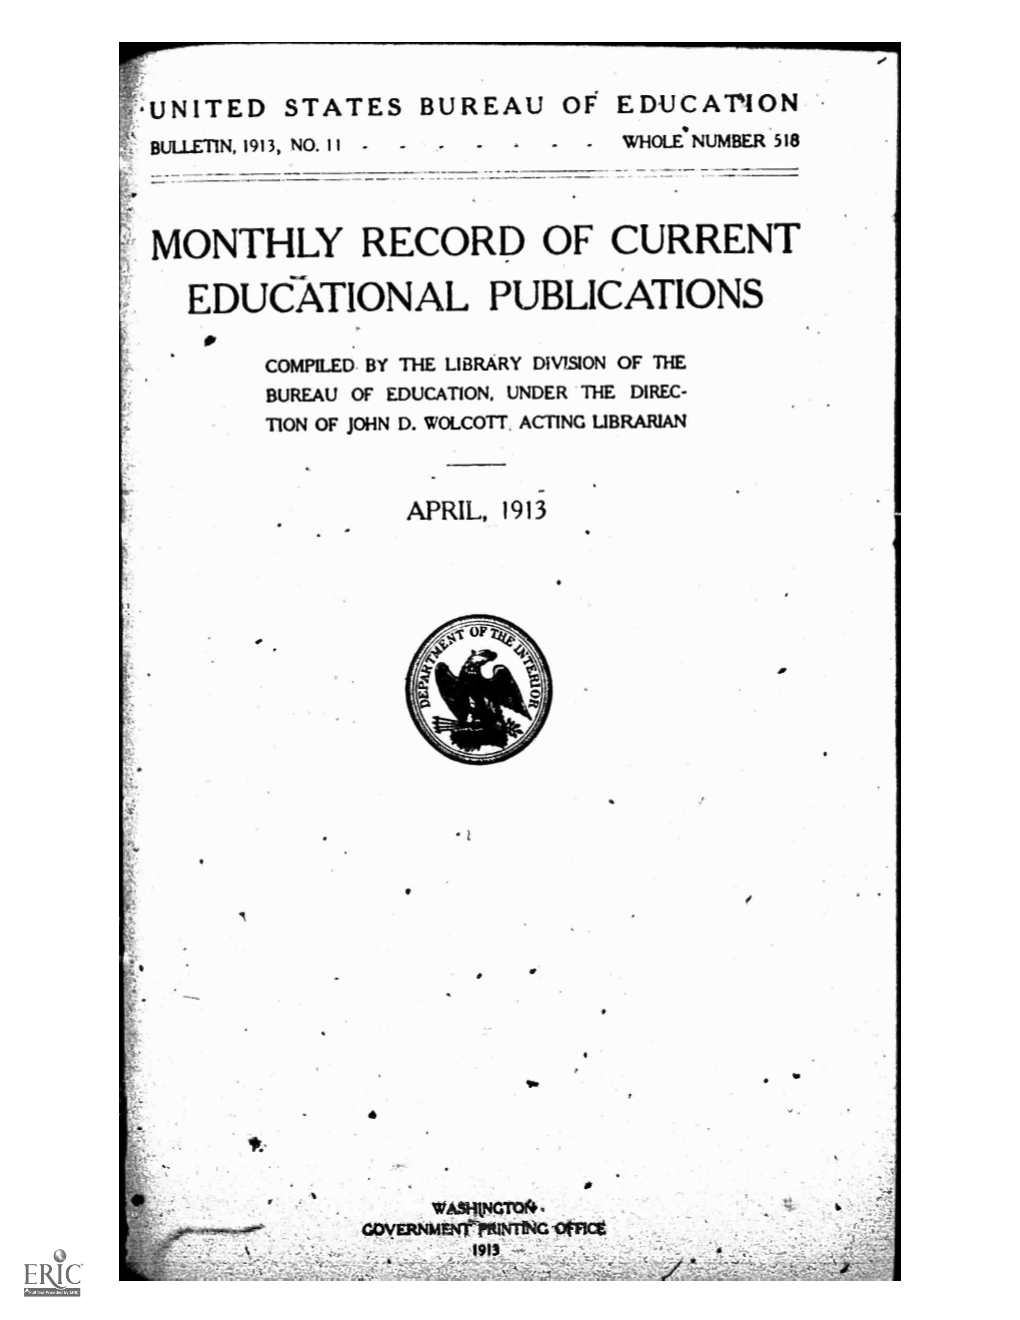 Monthly Record of Current Educational Publications